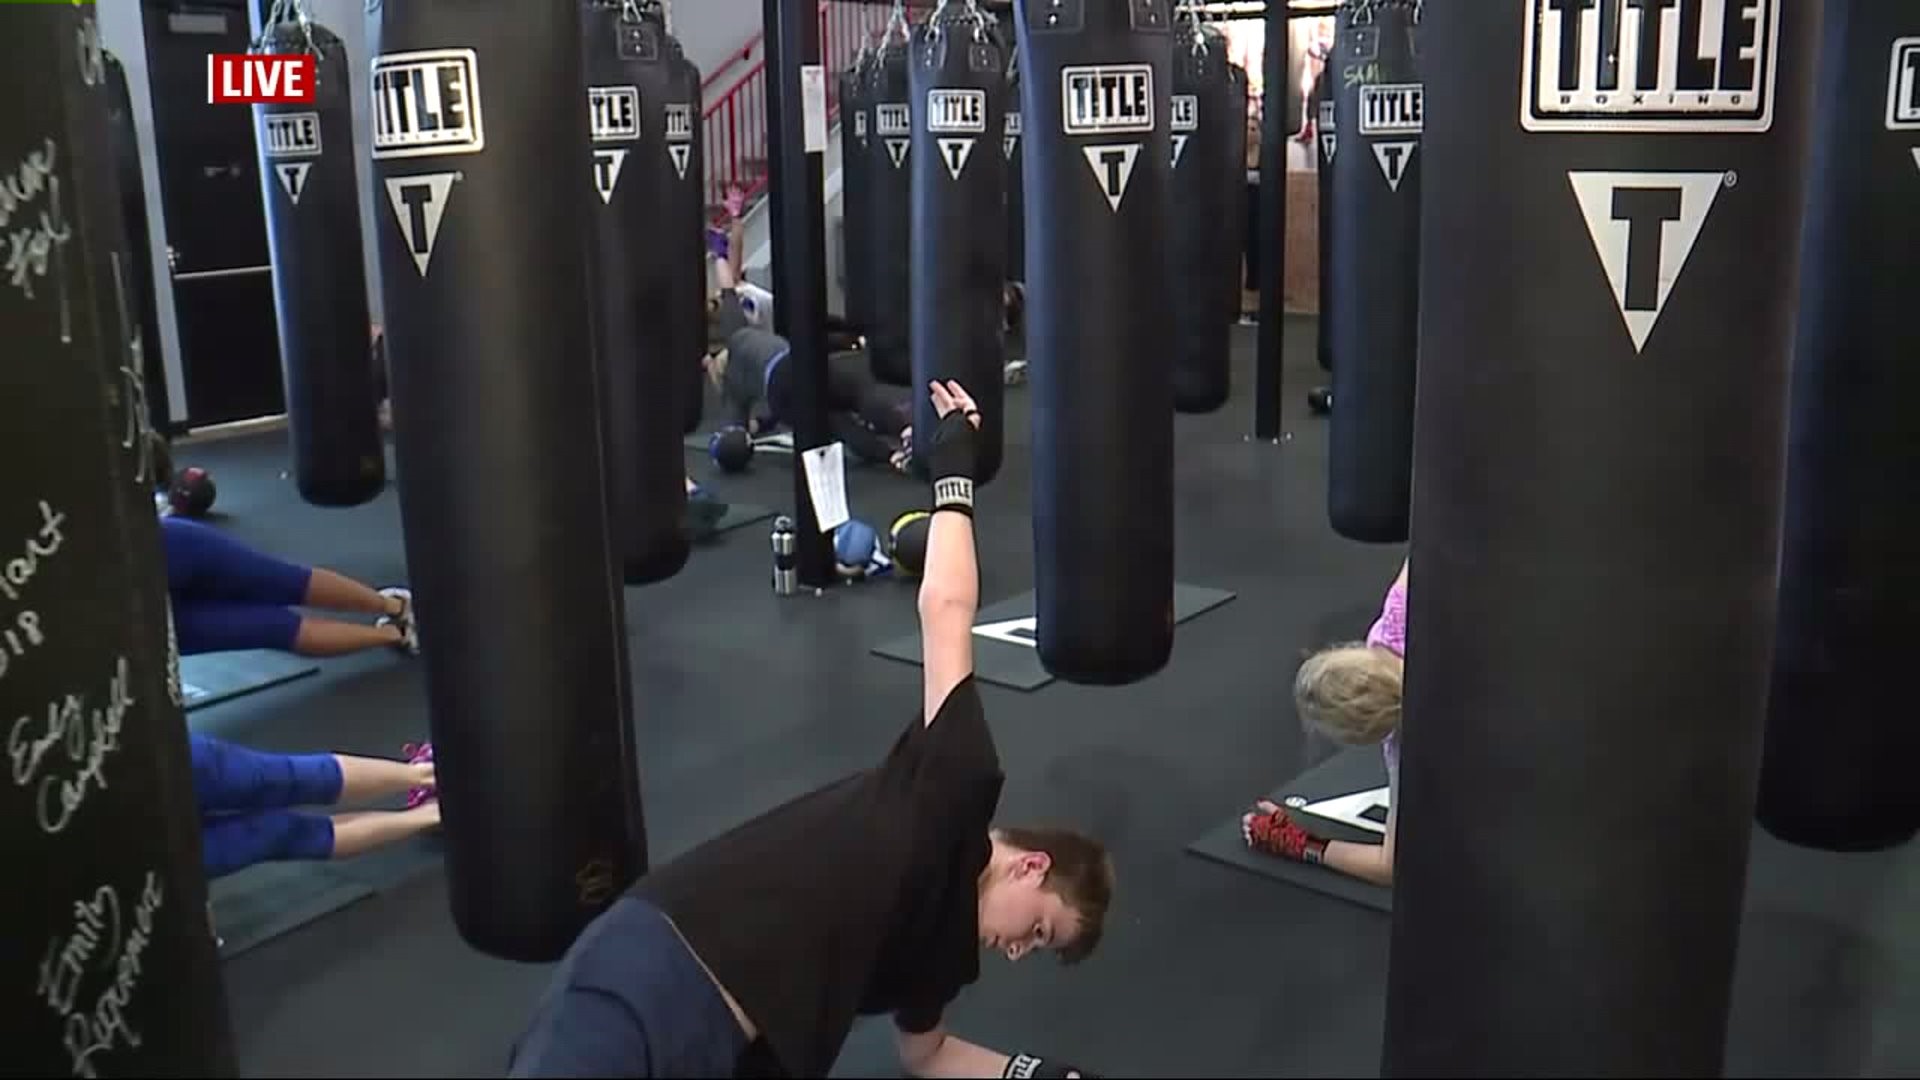 Classes at Title Boxing Club